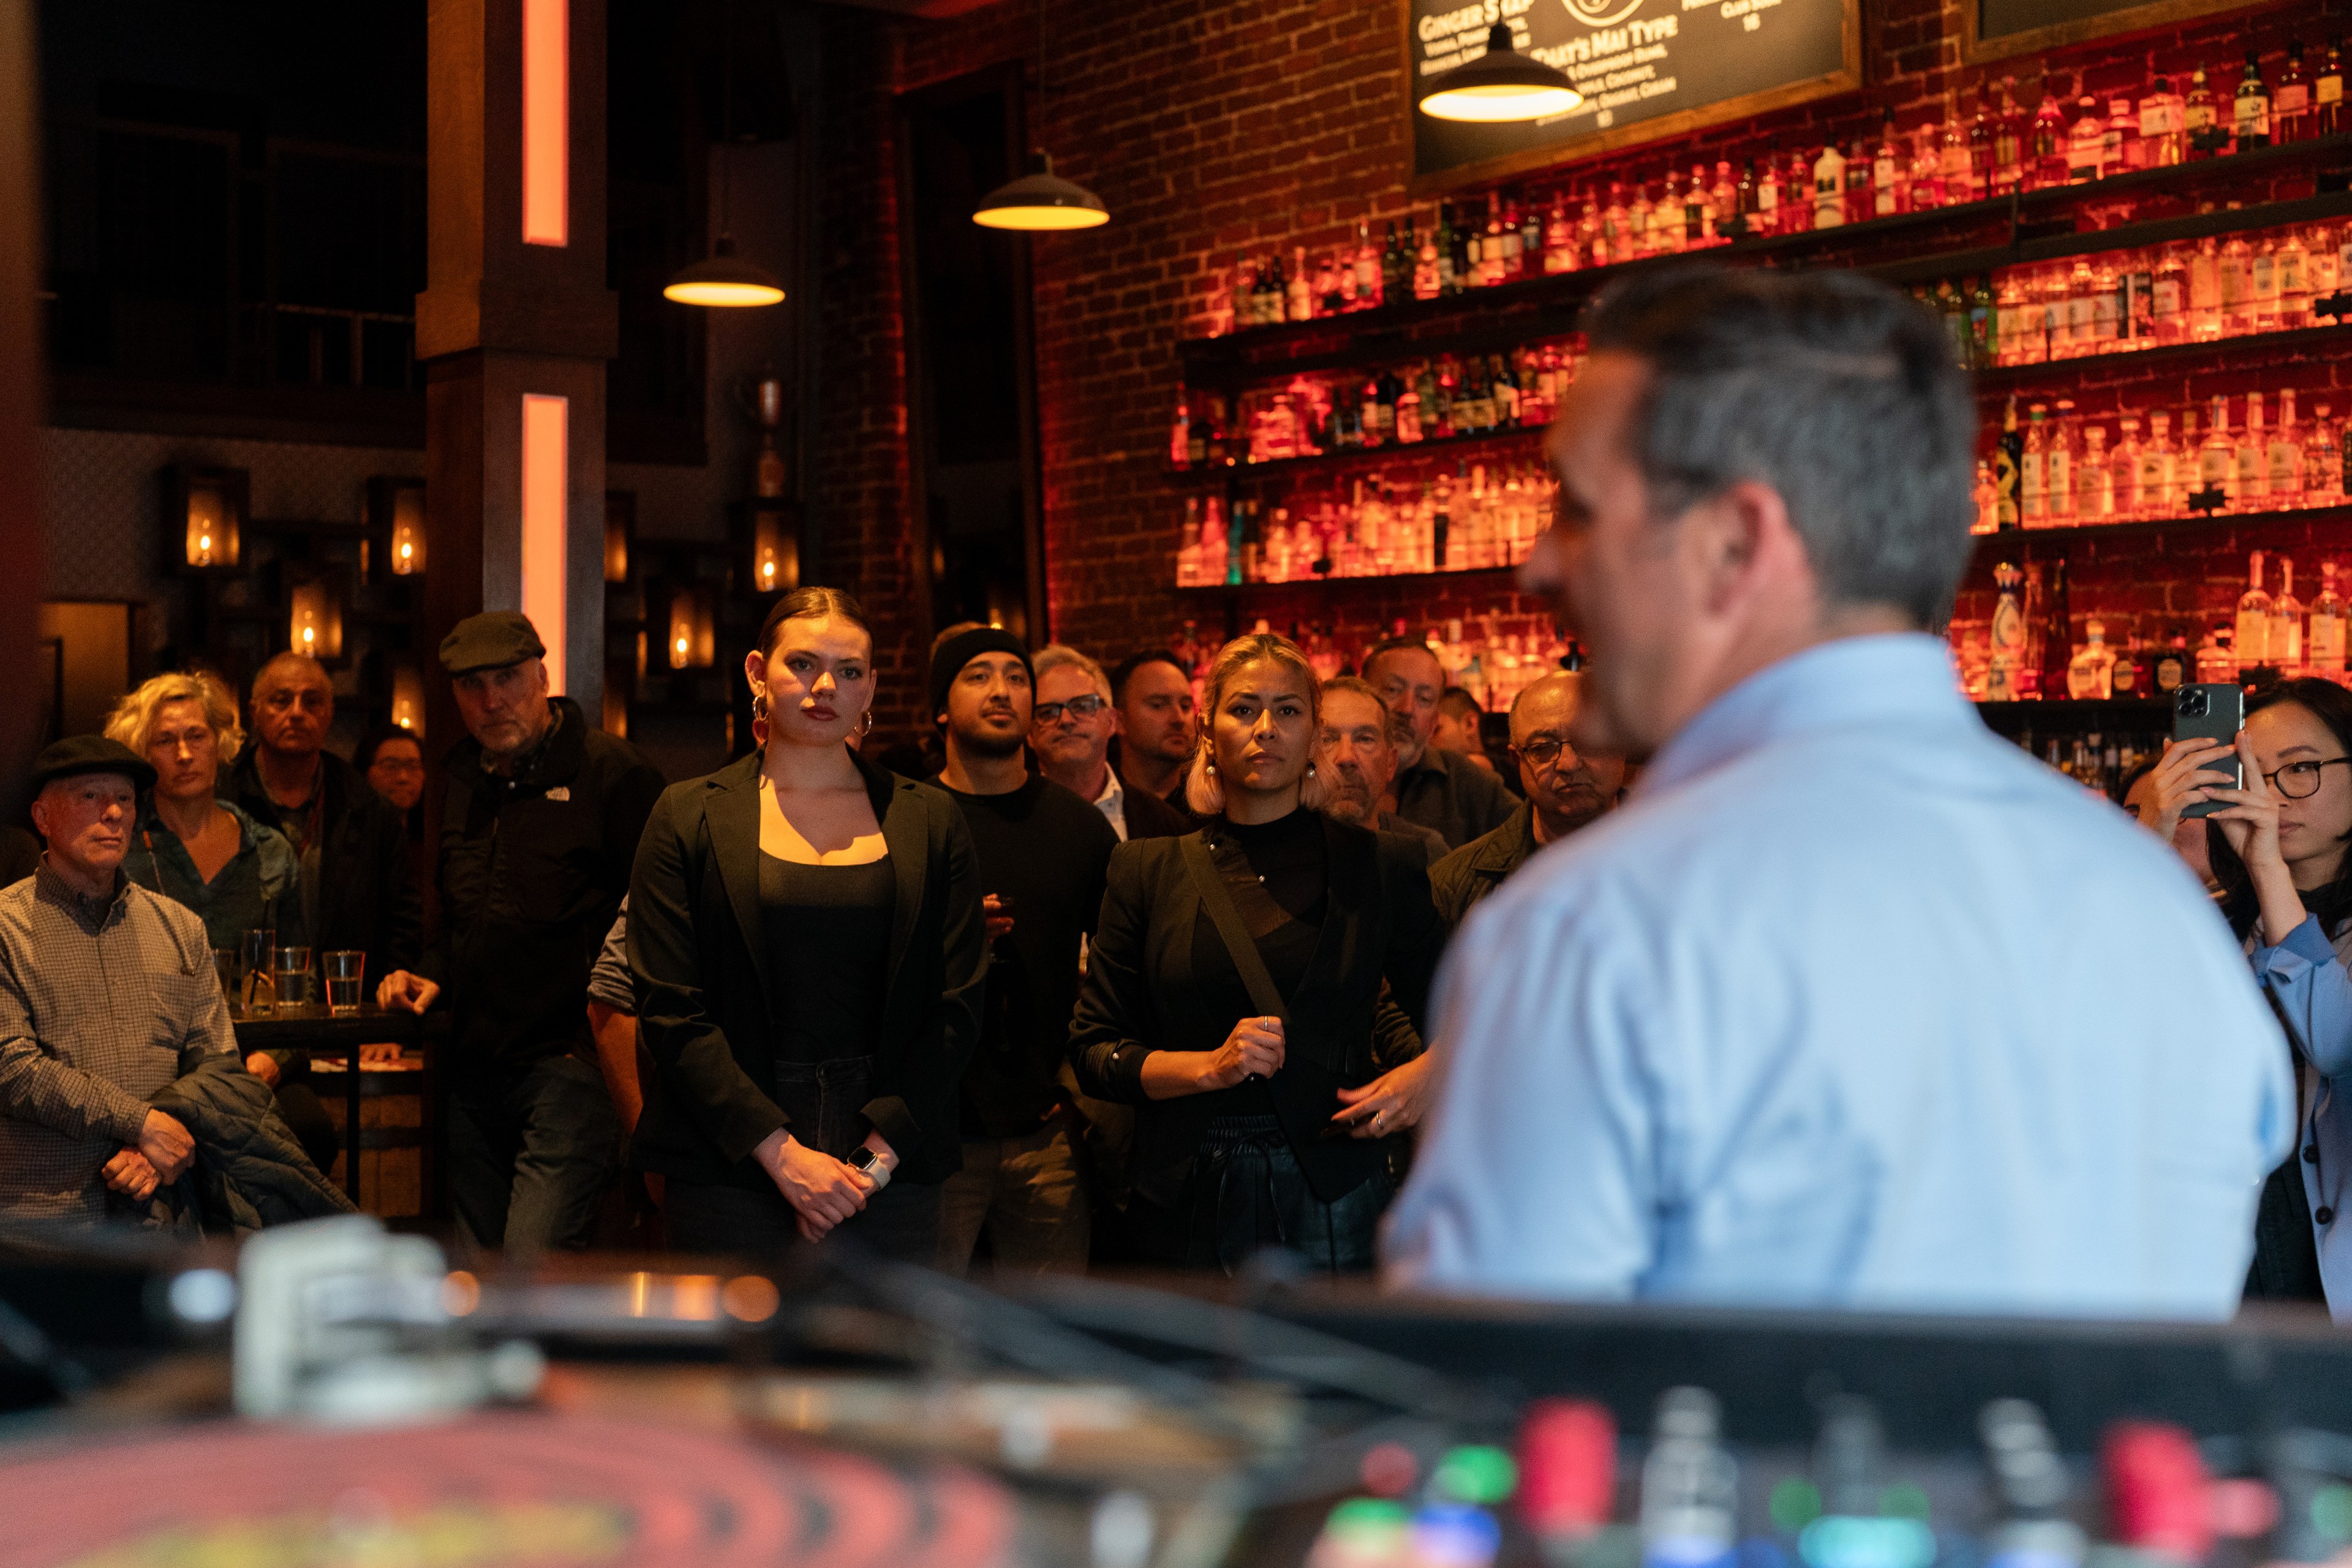 A group listens attentively to a speaker at a bar, illuminated by ambient lighting and a backlit shelf of bottles.